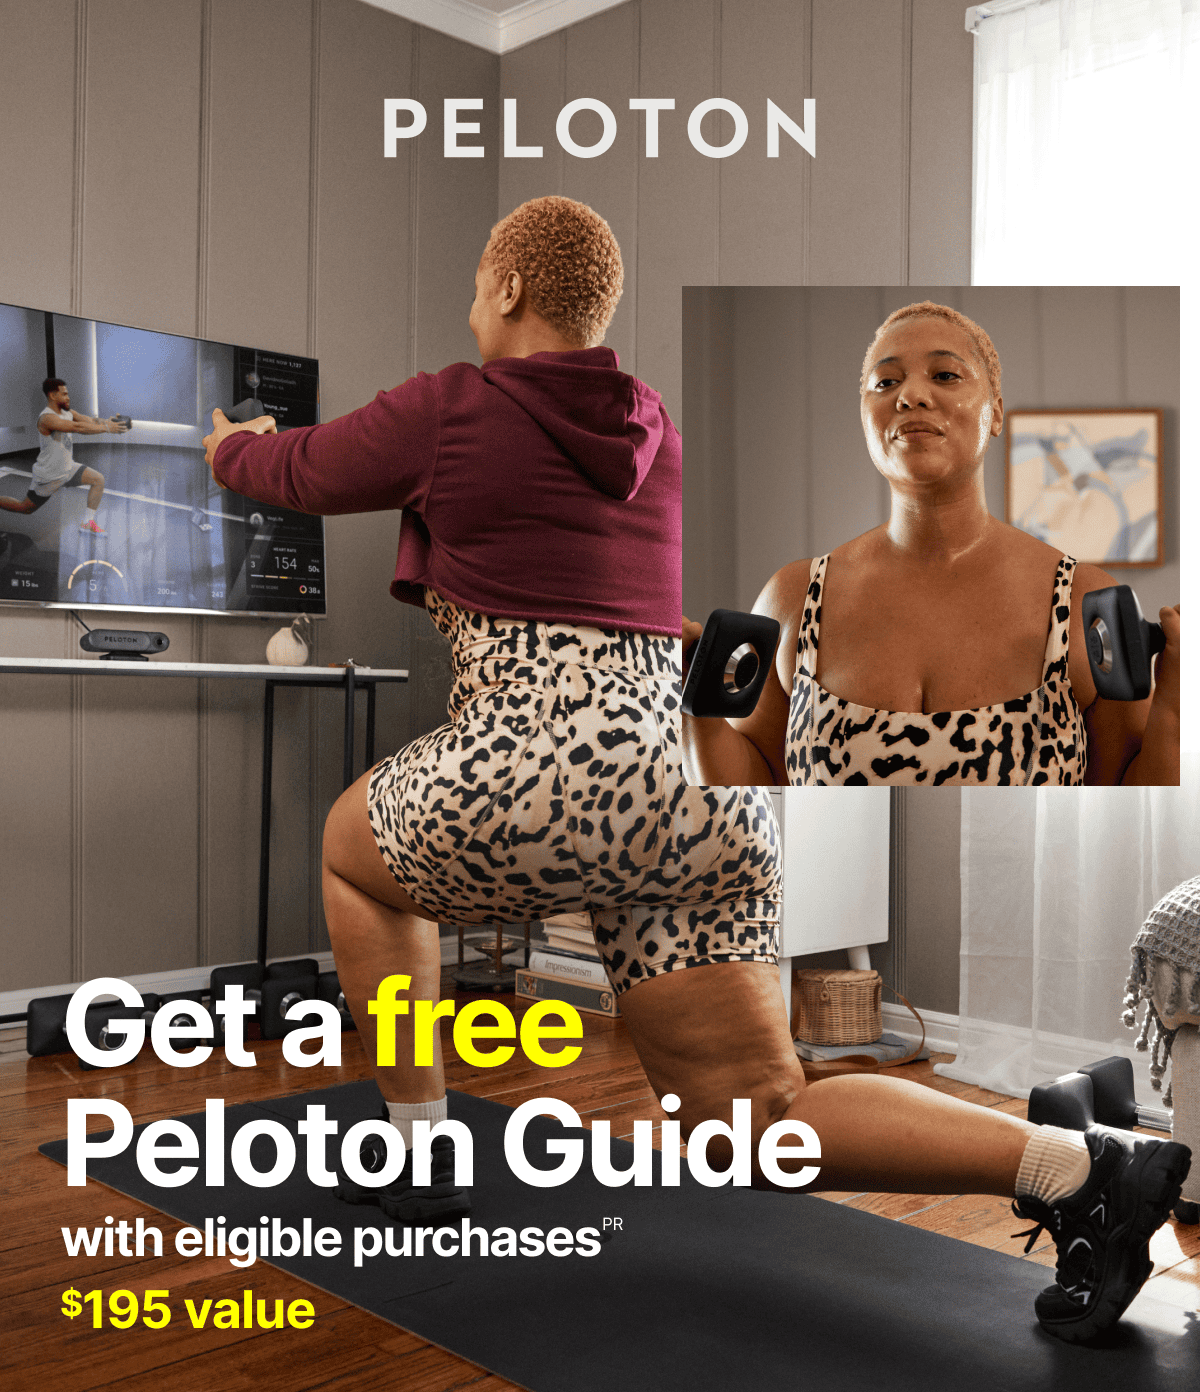 Get a free Peloton Guide with eligible purchases, \\$195 value